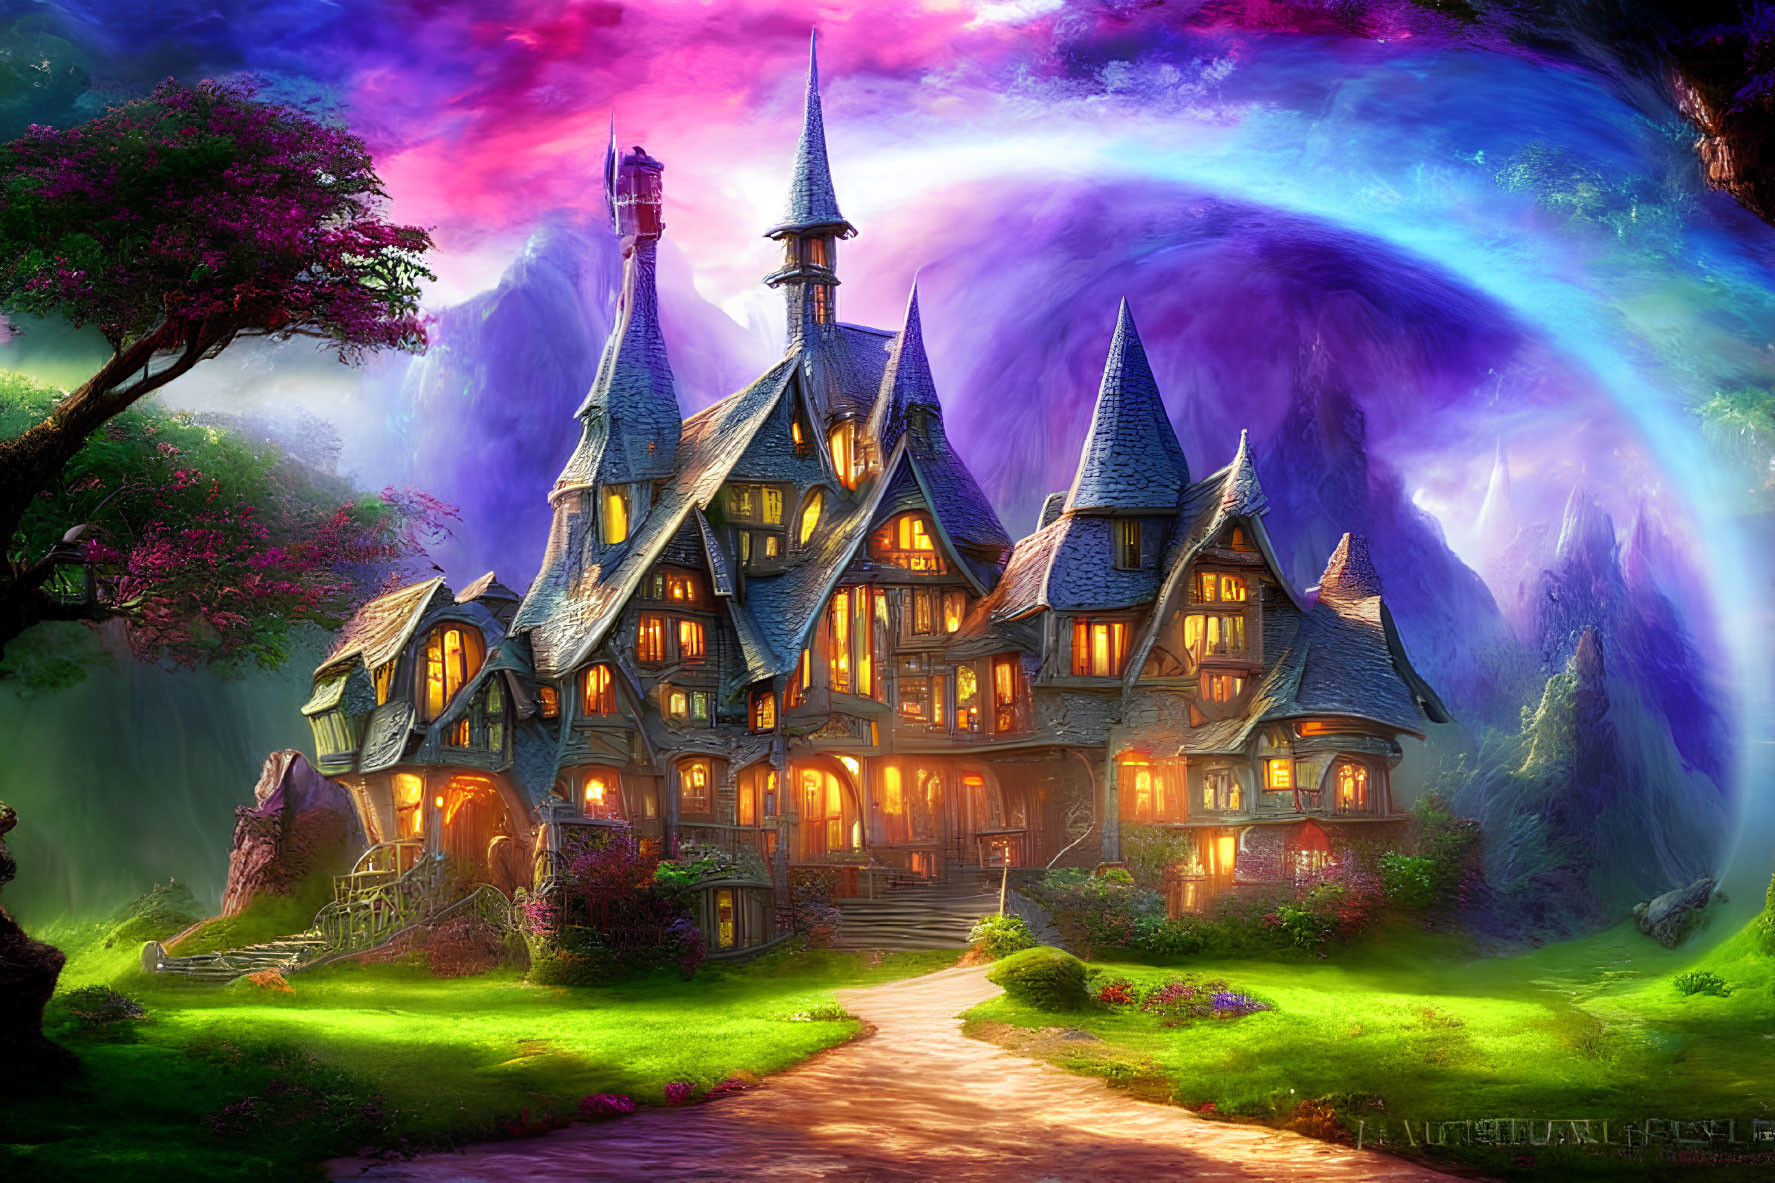 Enchanting fantasy mansion with glowing windows and pointed rooftops